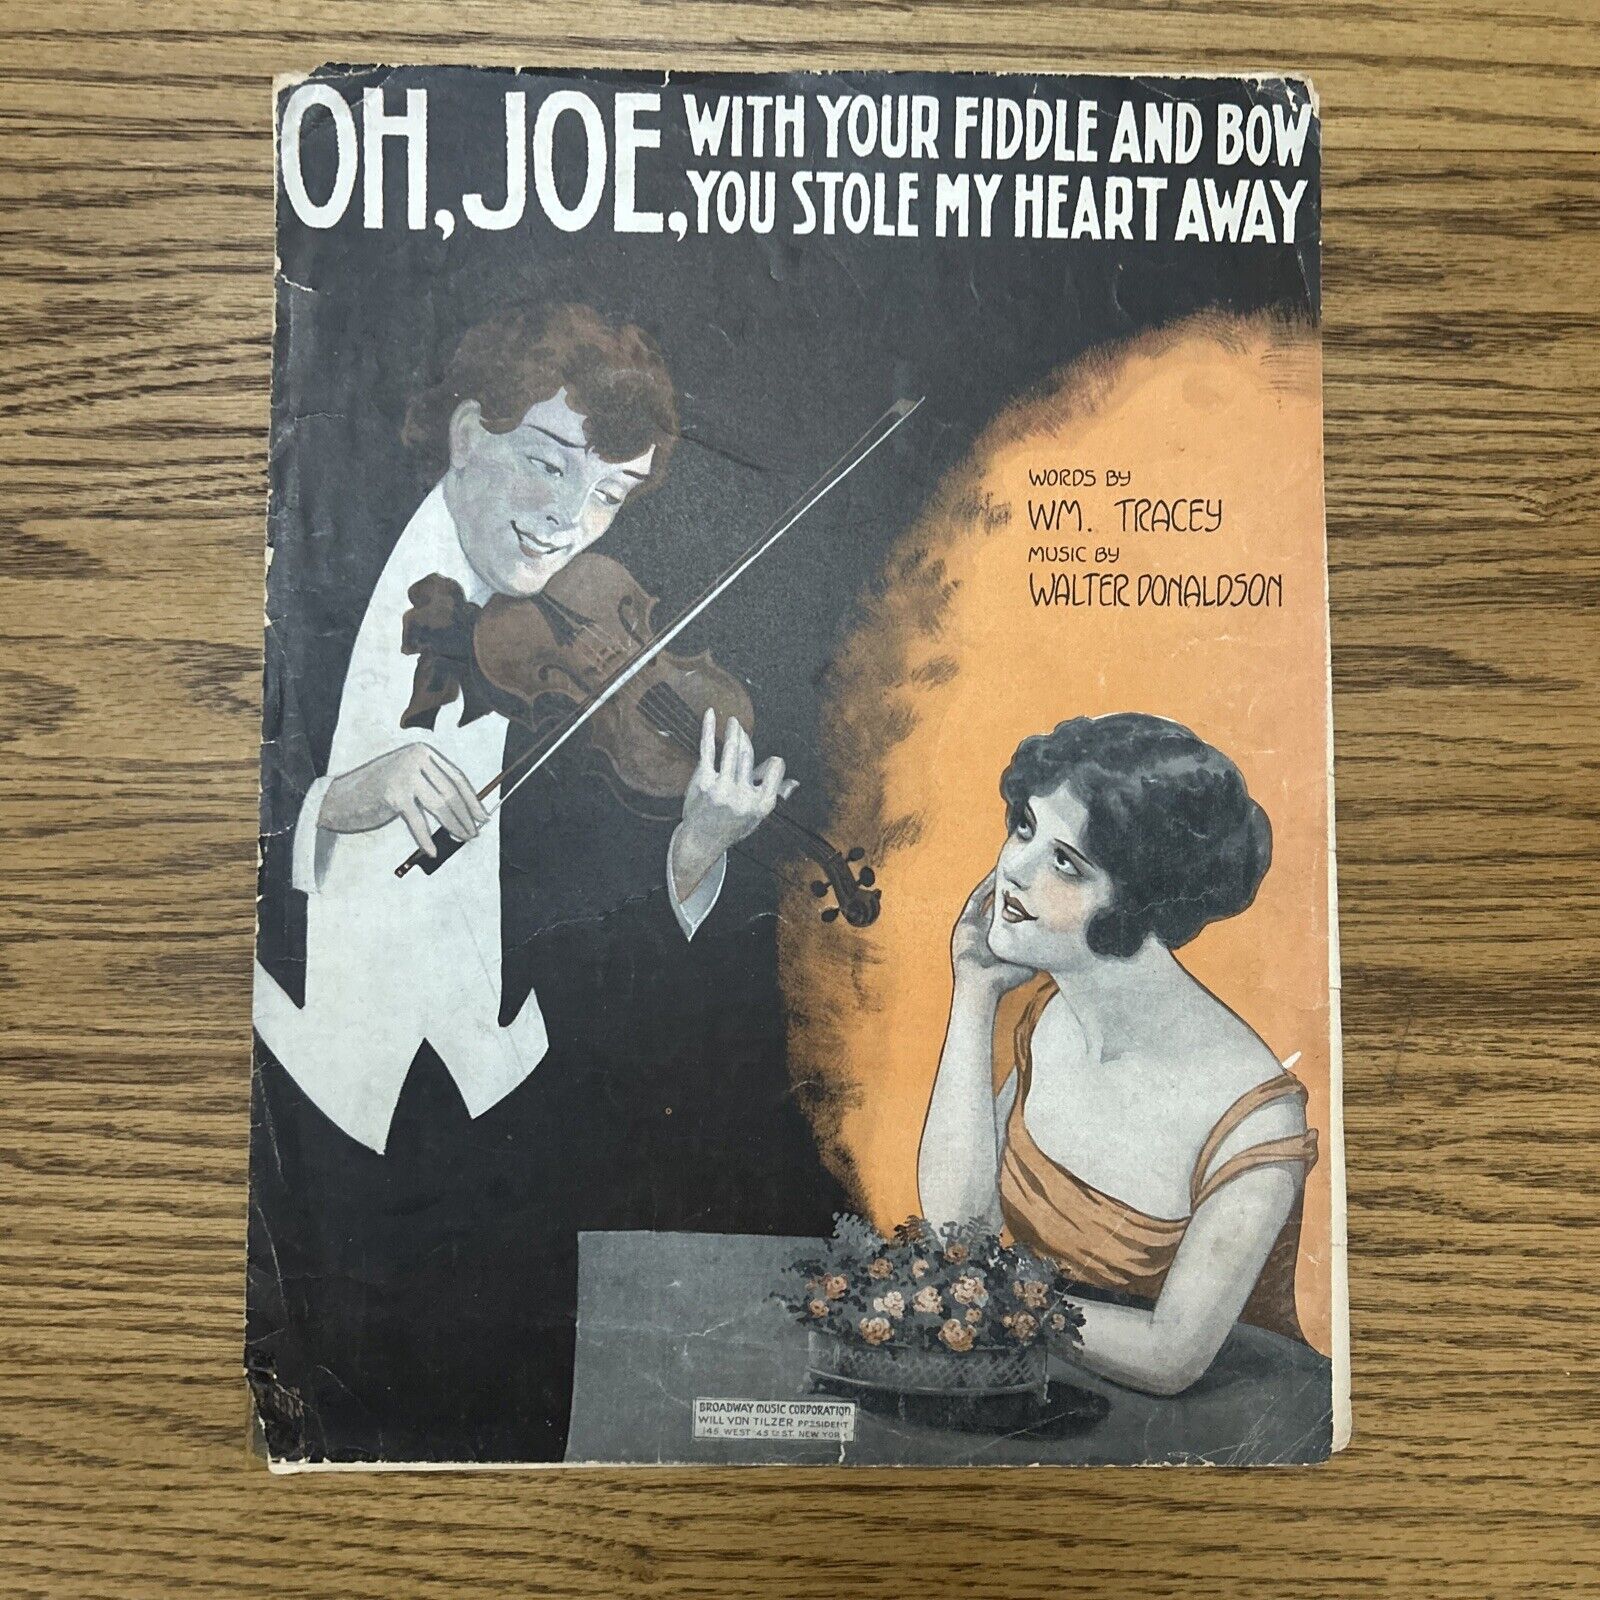 elektronisk nikotin Udtale Oh, Joe With Your Fiddle And Bow You Stole My Heart Away - Donaldson Sheet  Music | eBay